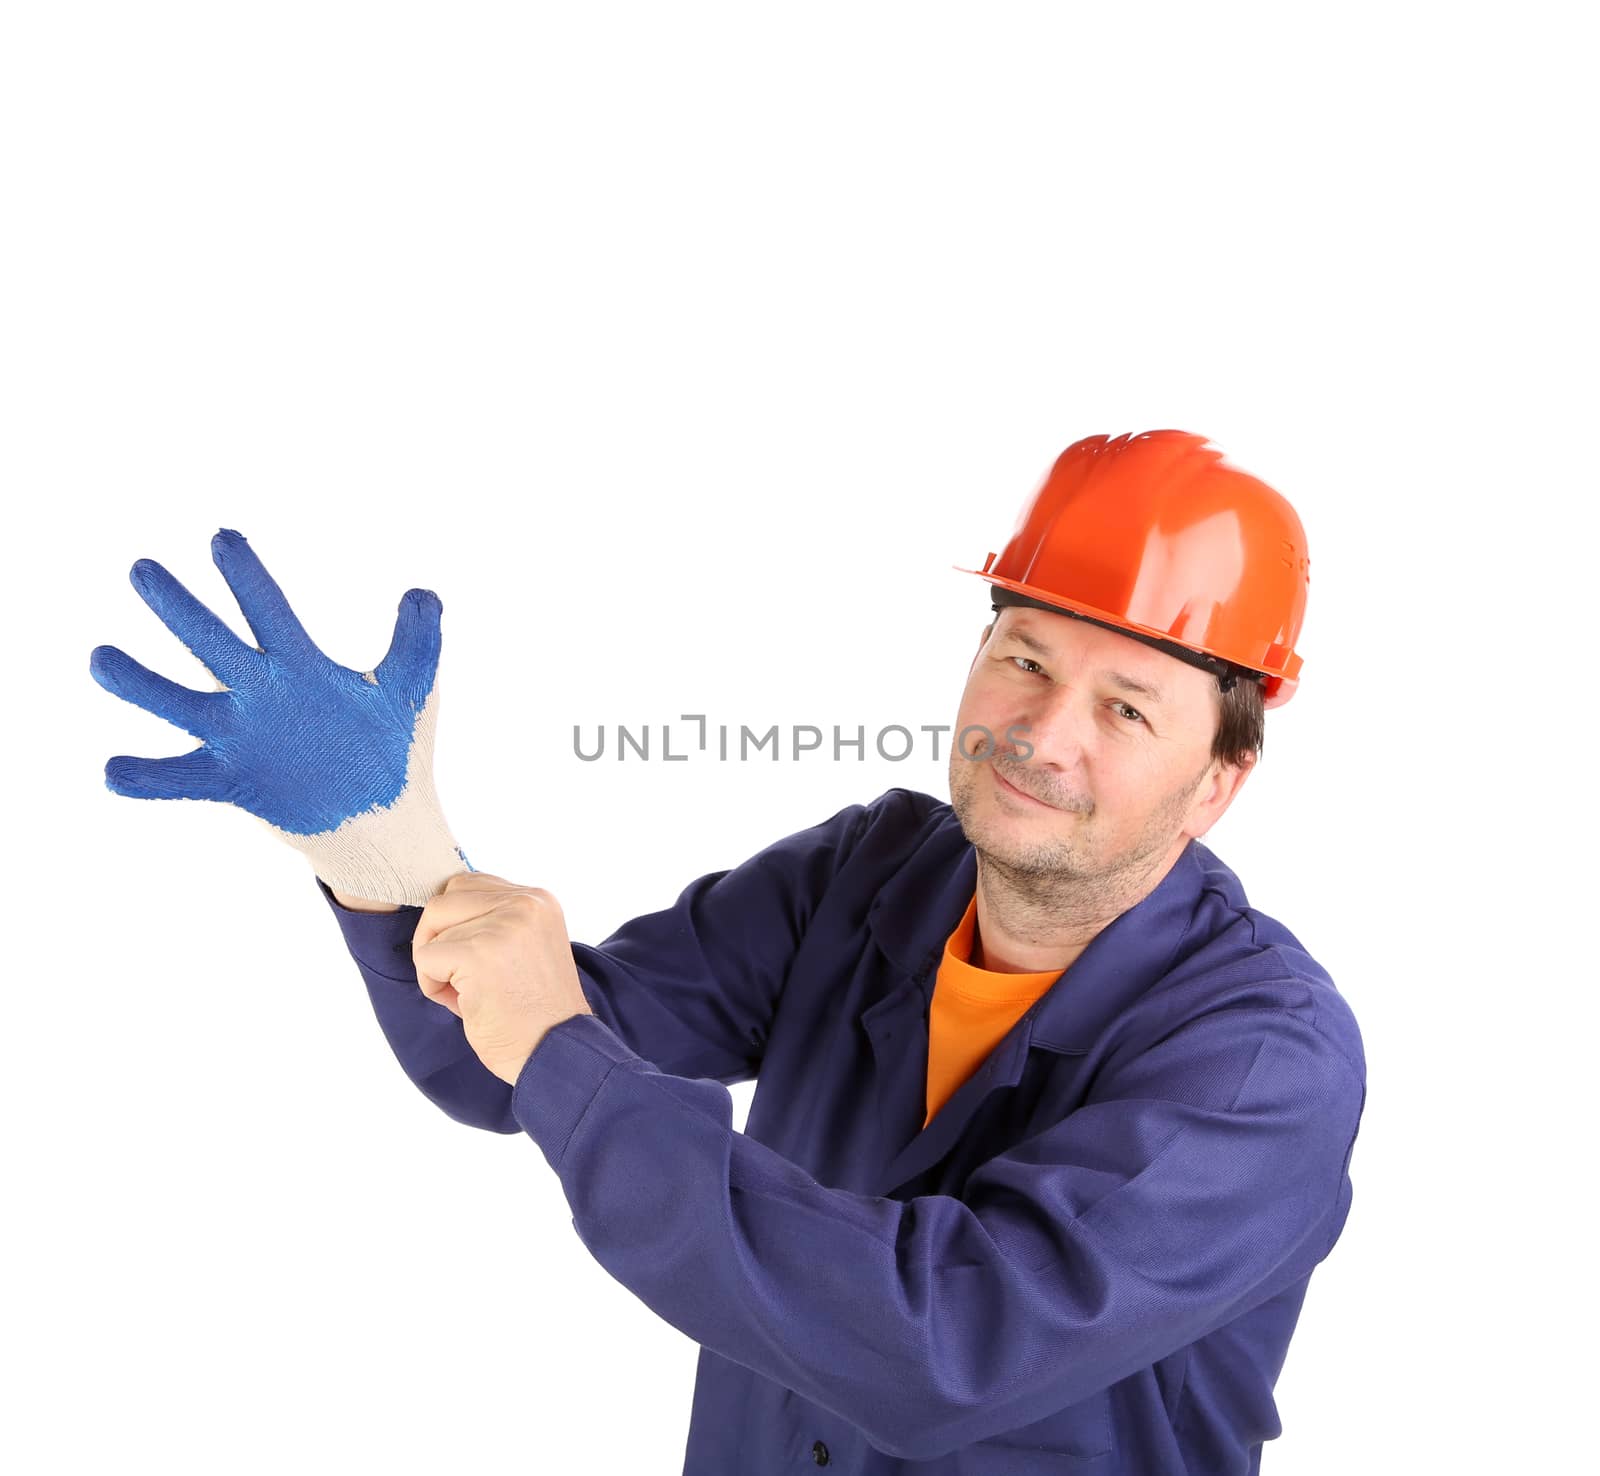 Worker shows hand in glove. Isolated on a white backgropund.